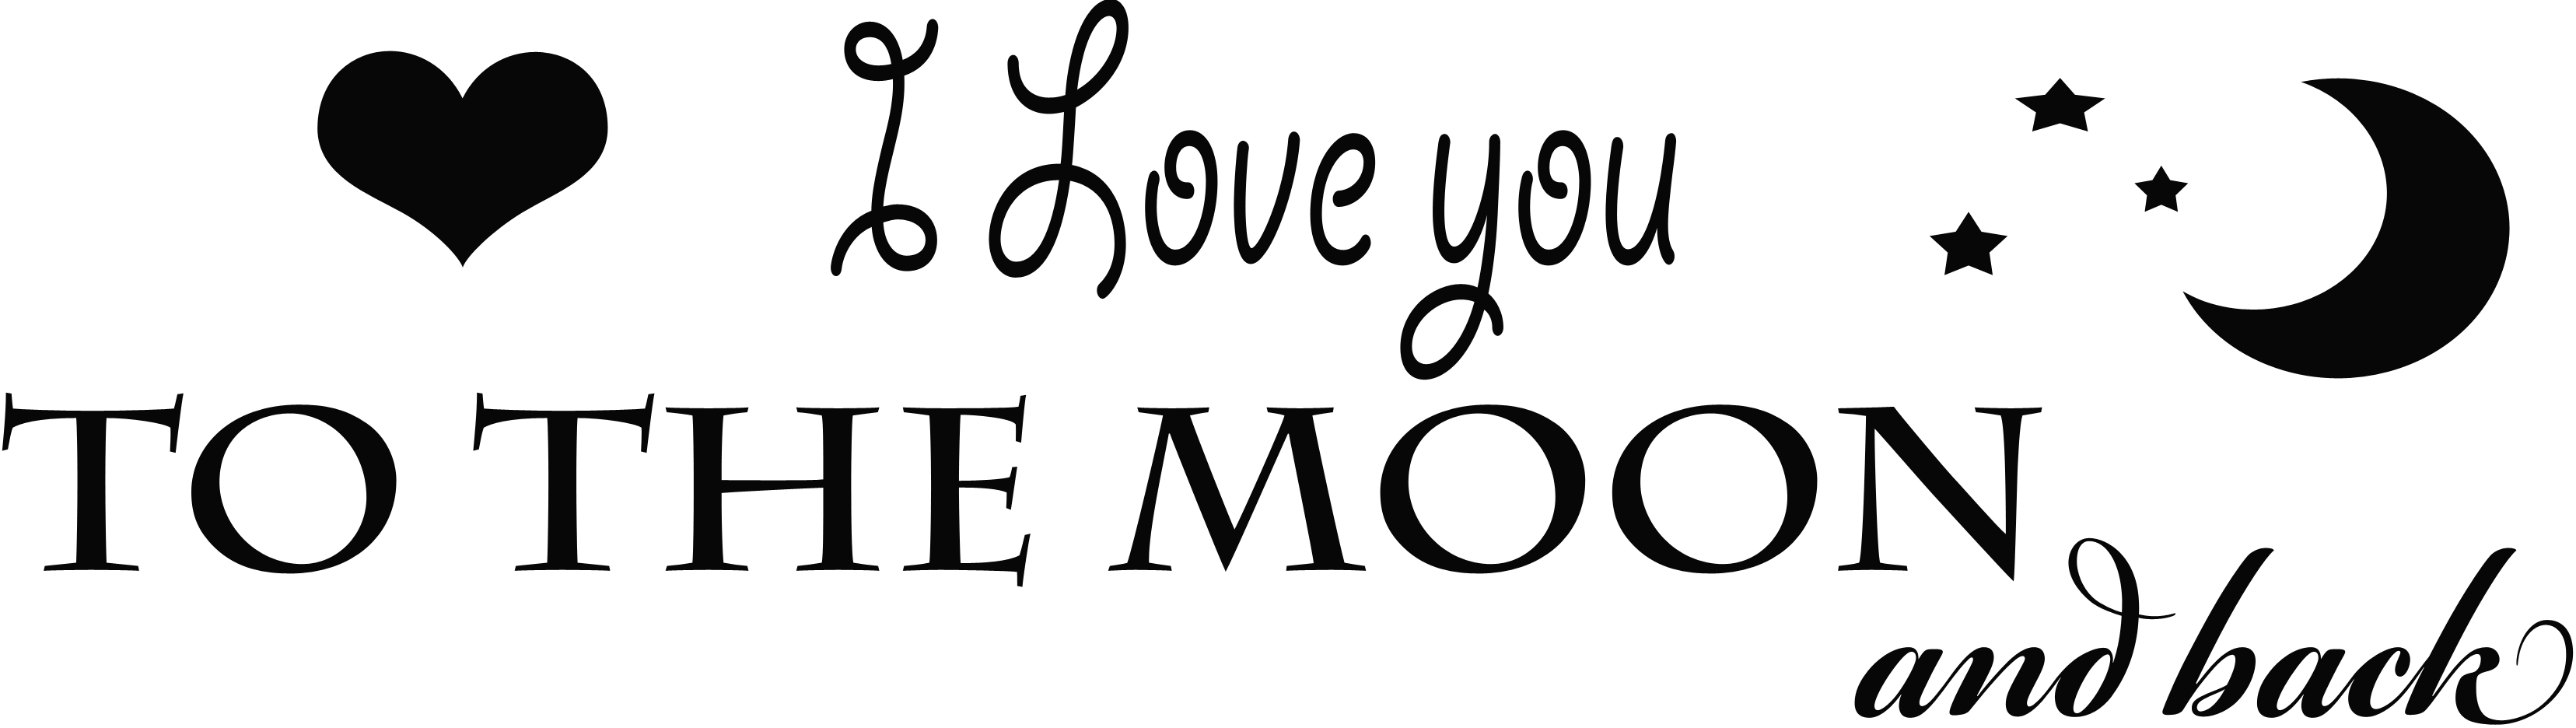 I Love You To The Moon And Back PNG Transparent Image